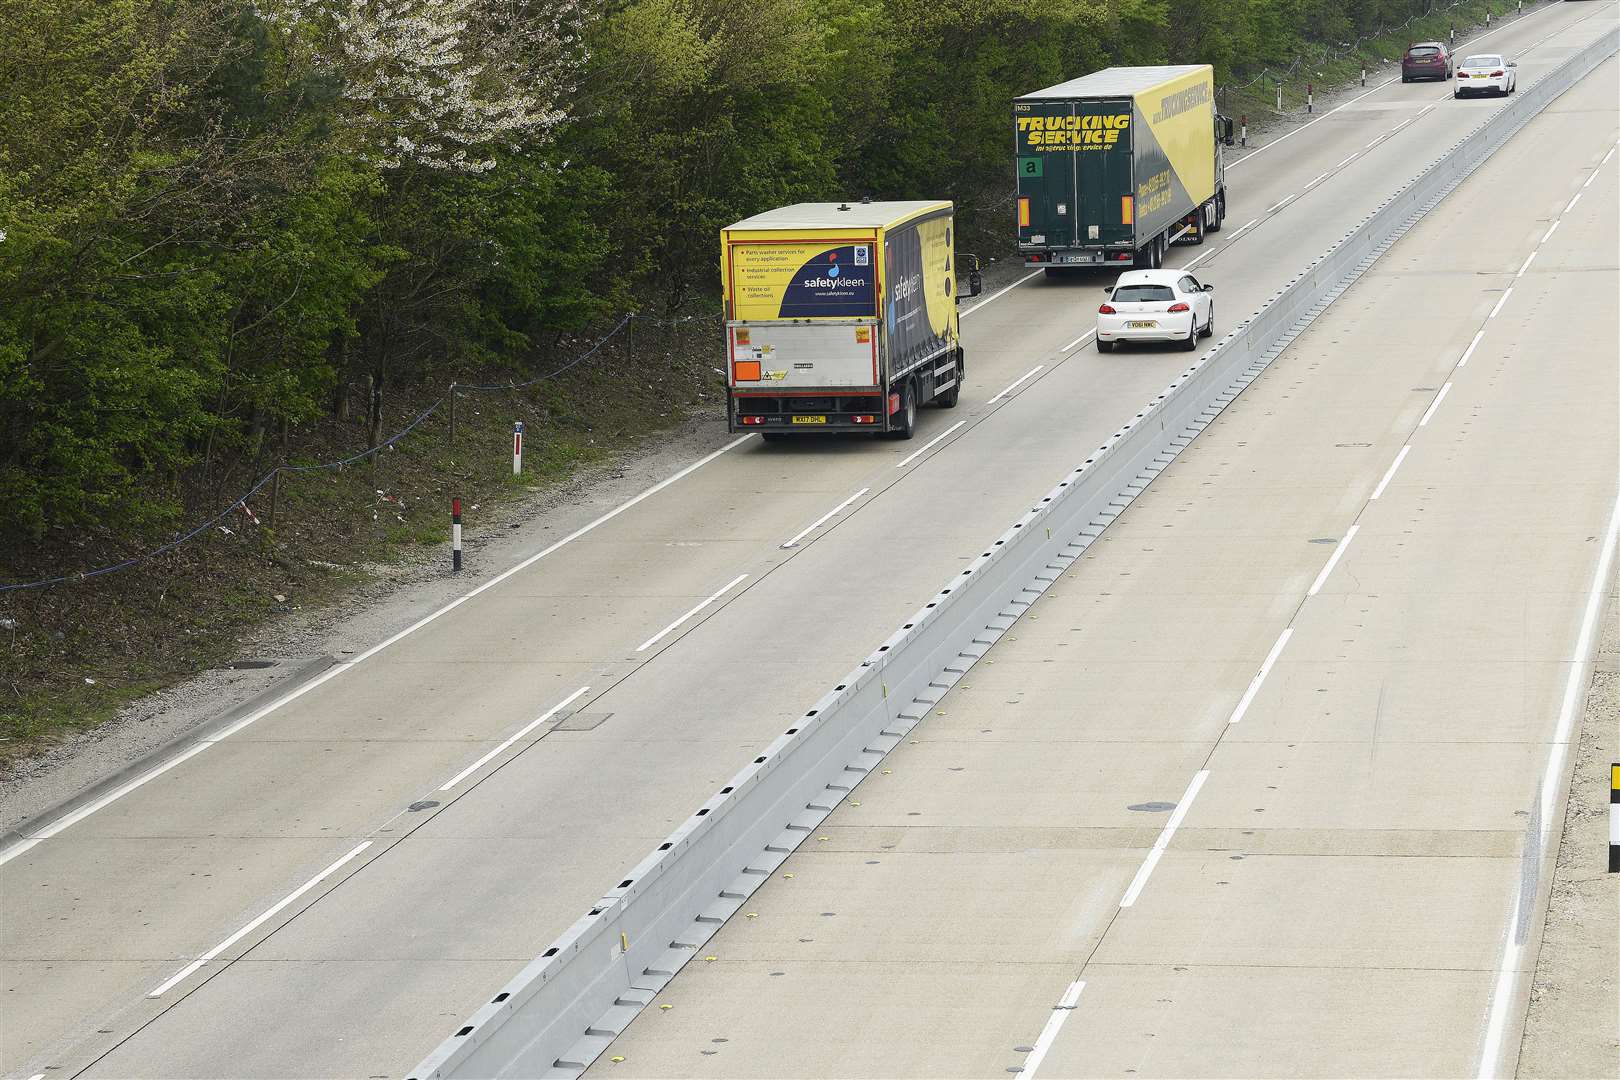 The barrier is still in place on the M20 - even though Operation Brock was lifted last month